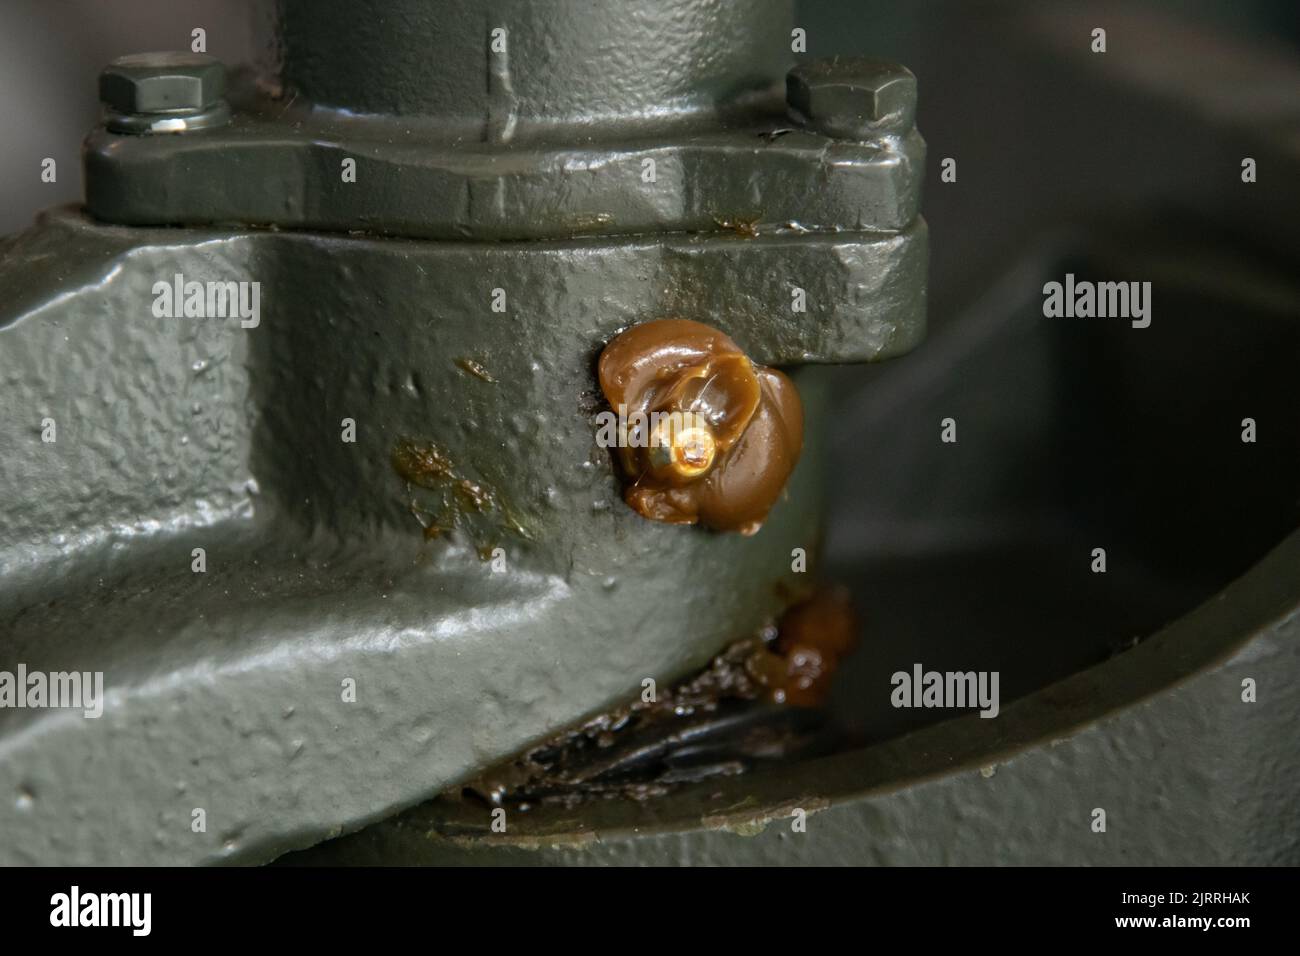 Grease nipple on industrial equipment with excessive grease lubricant Stock Photo